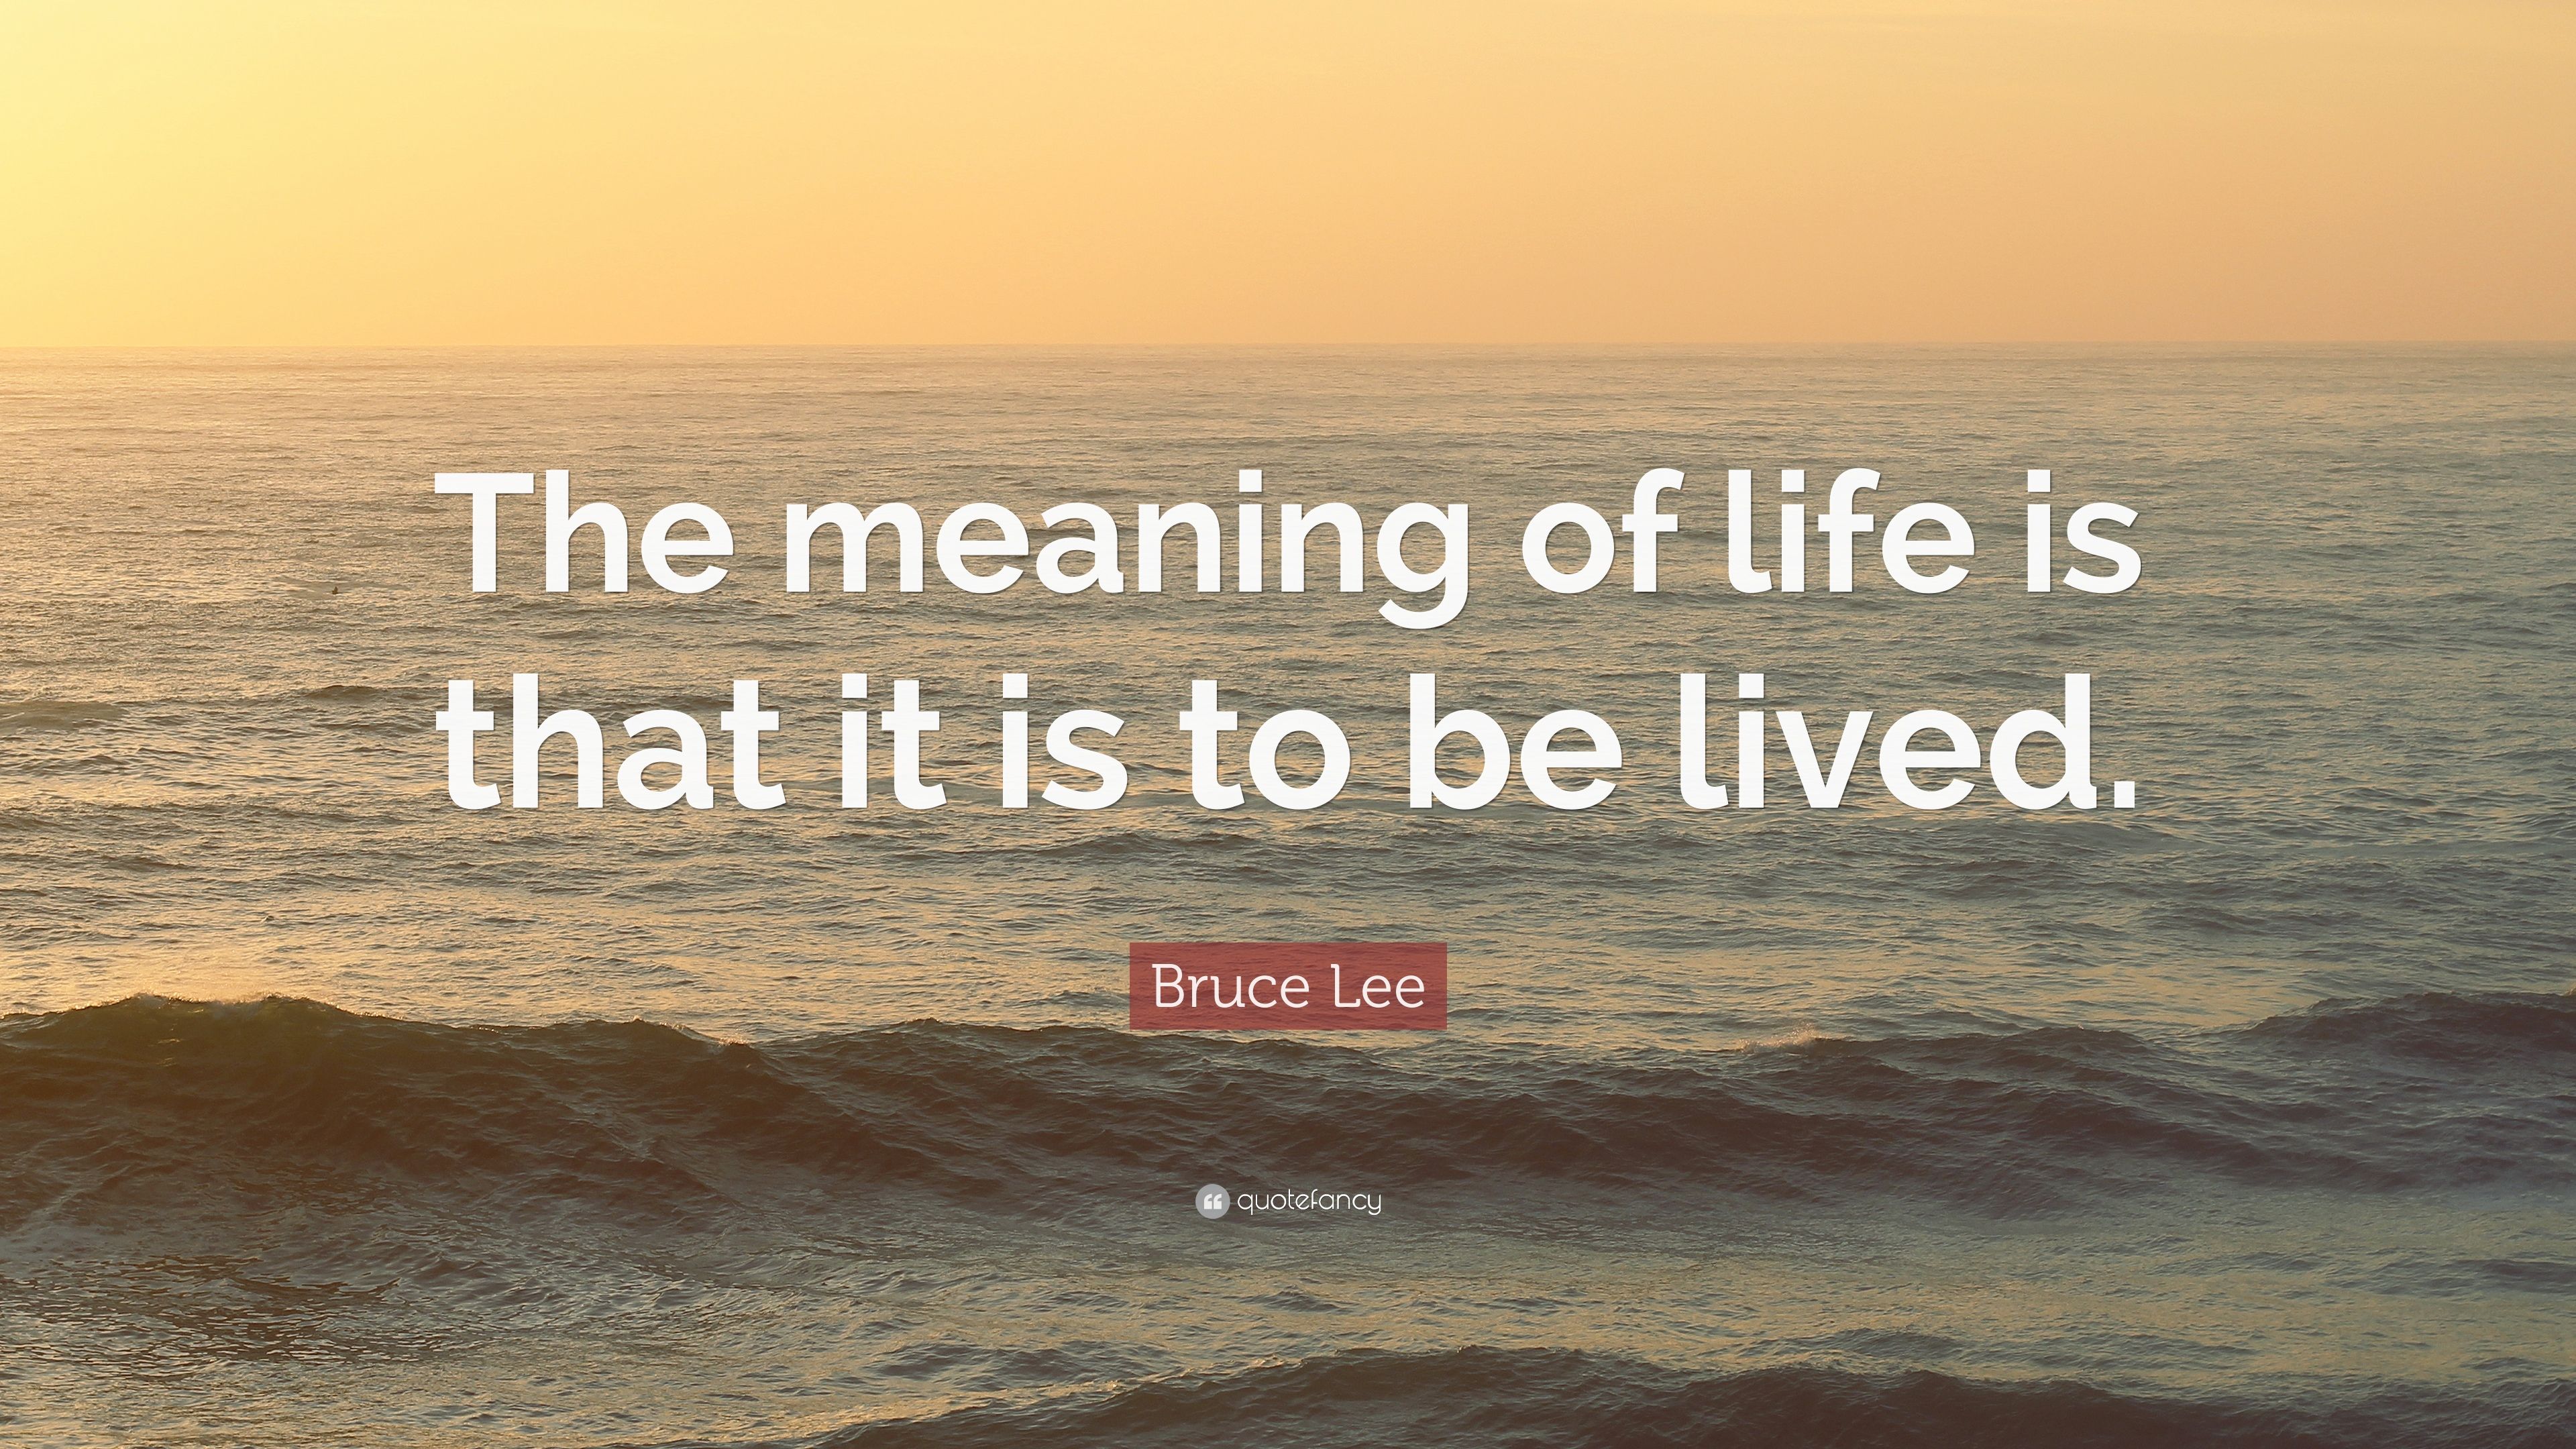 Meaning Of Life Quotes Wallpapers - Wallpaper Cave